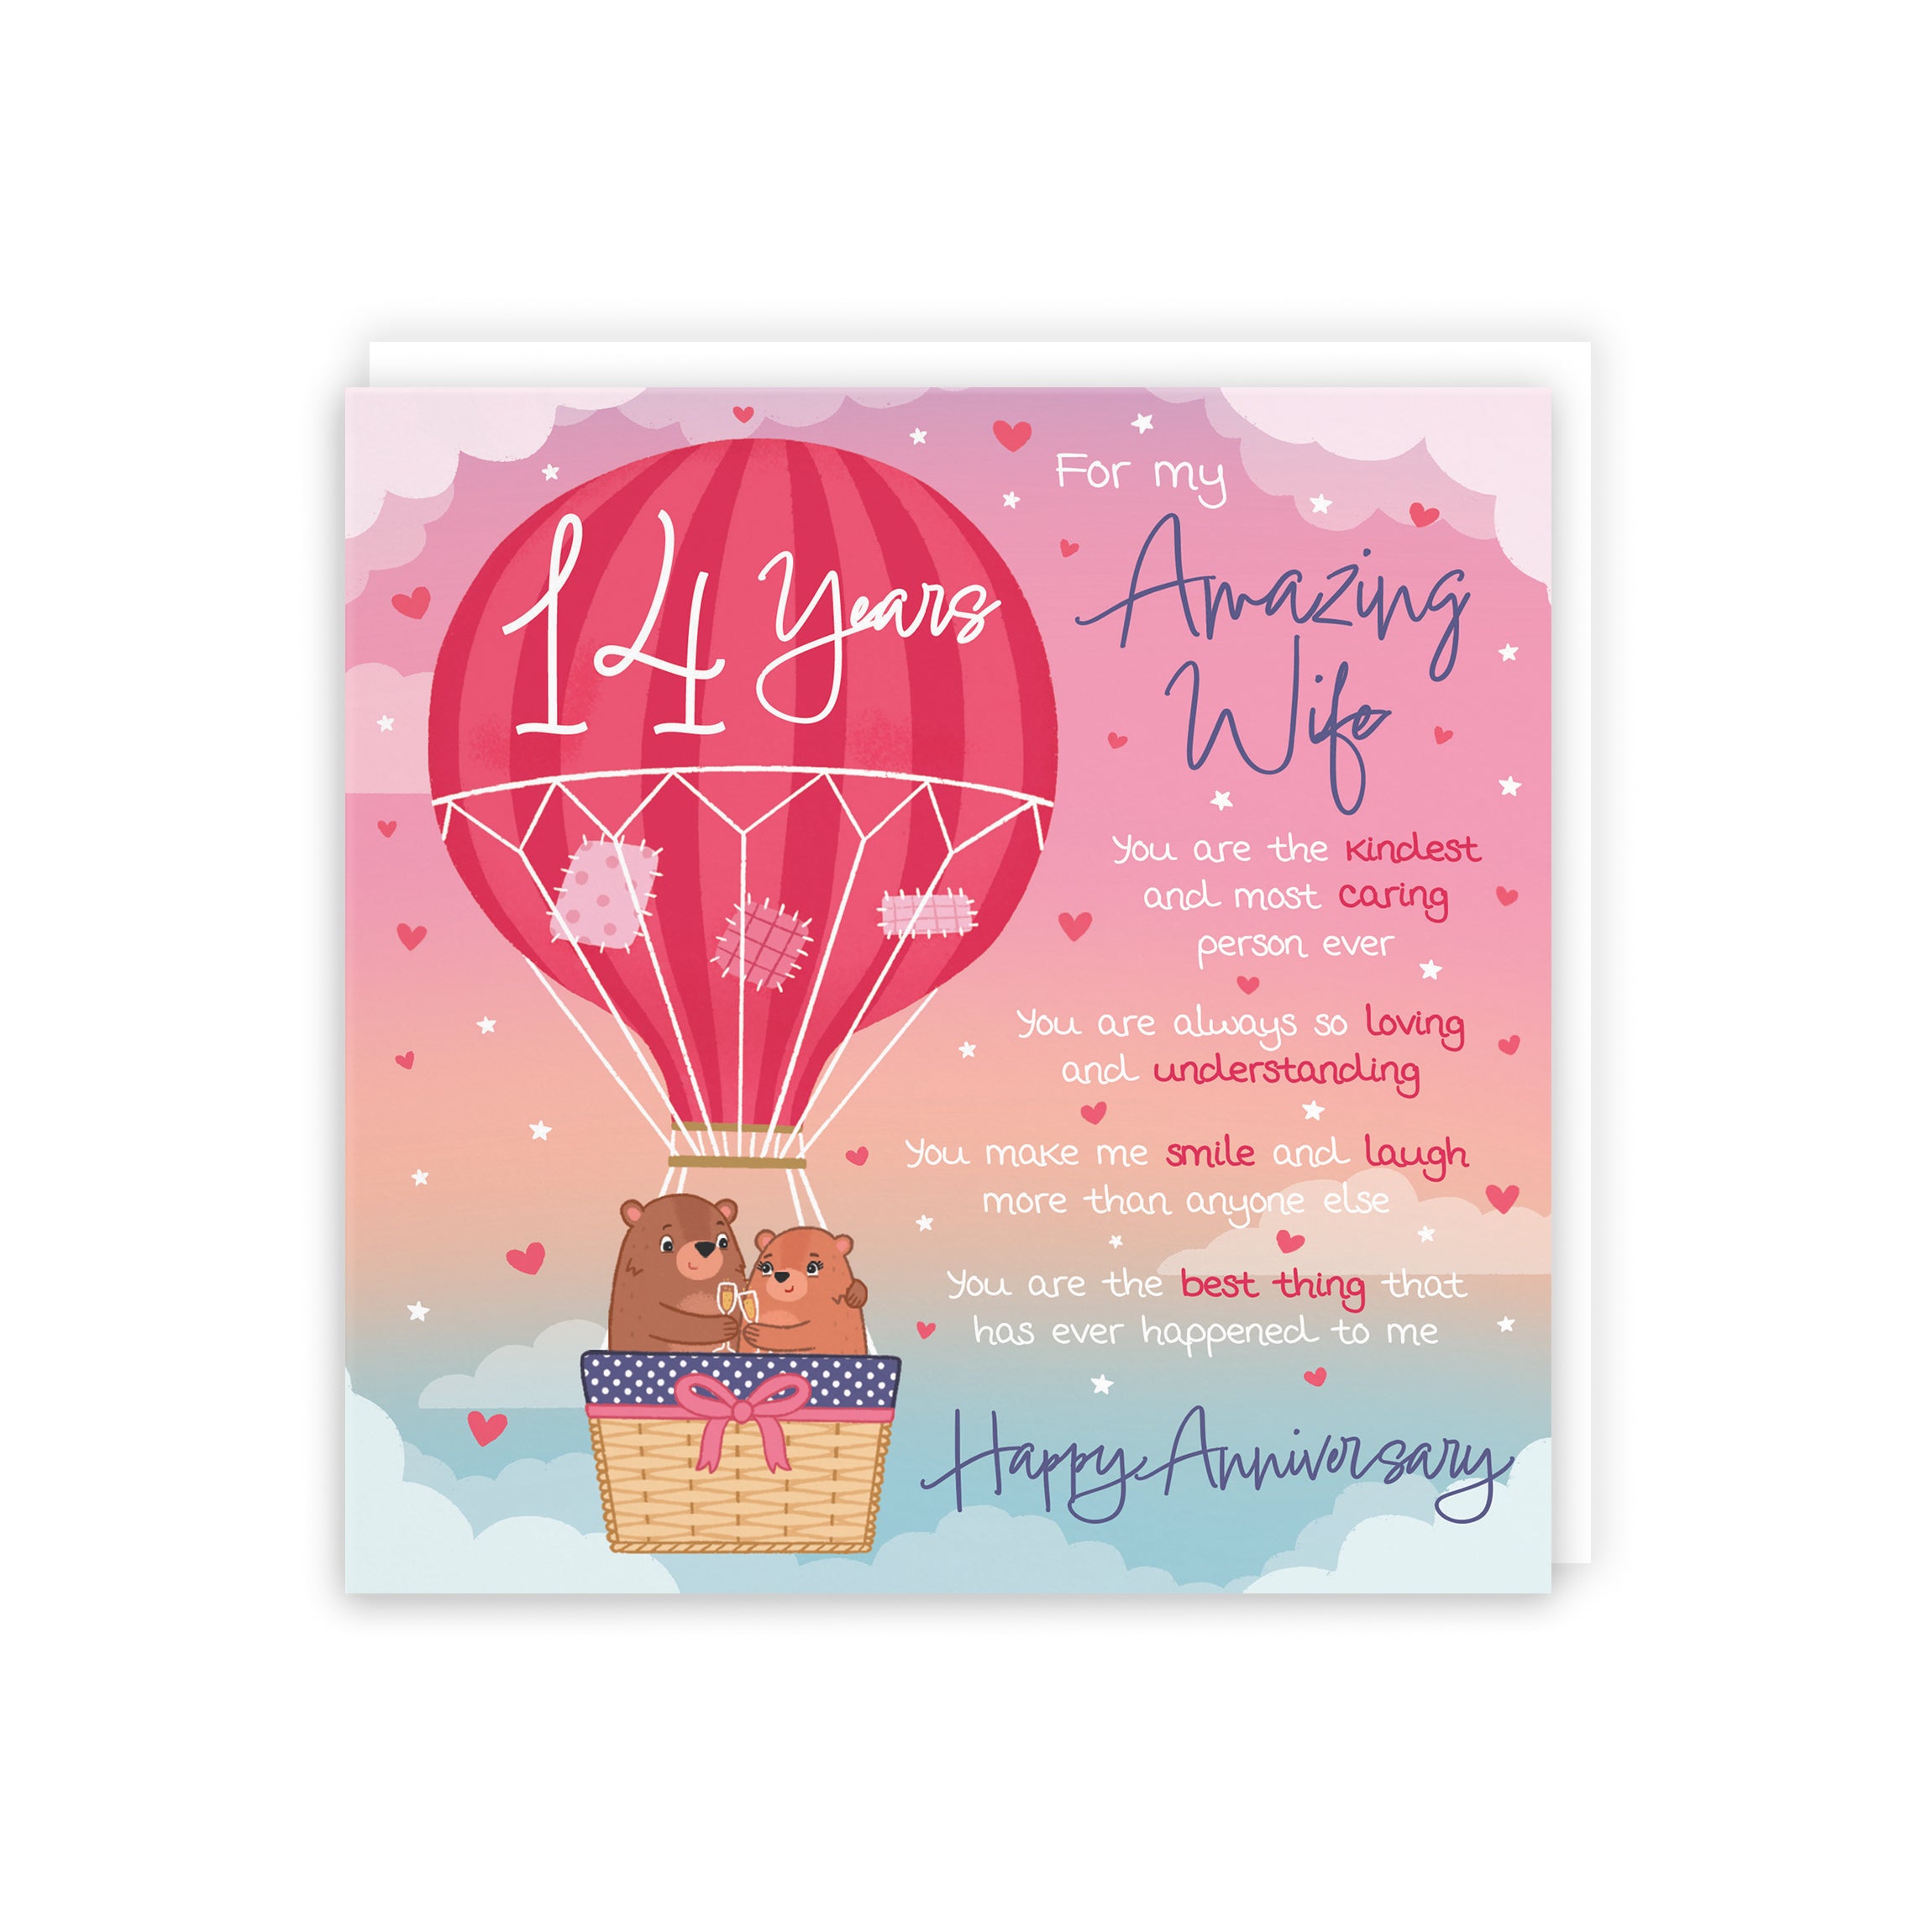 Wife 14th Anniversary Poem Card Love Is In The Air Cute Bears